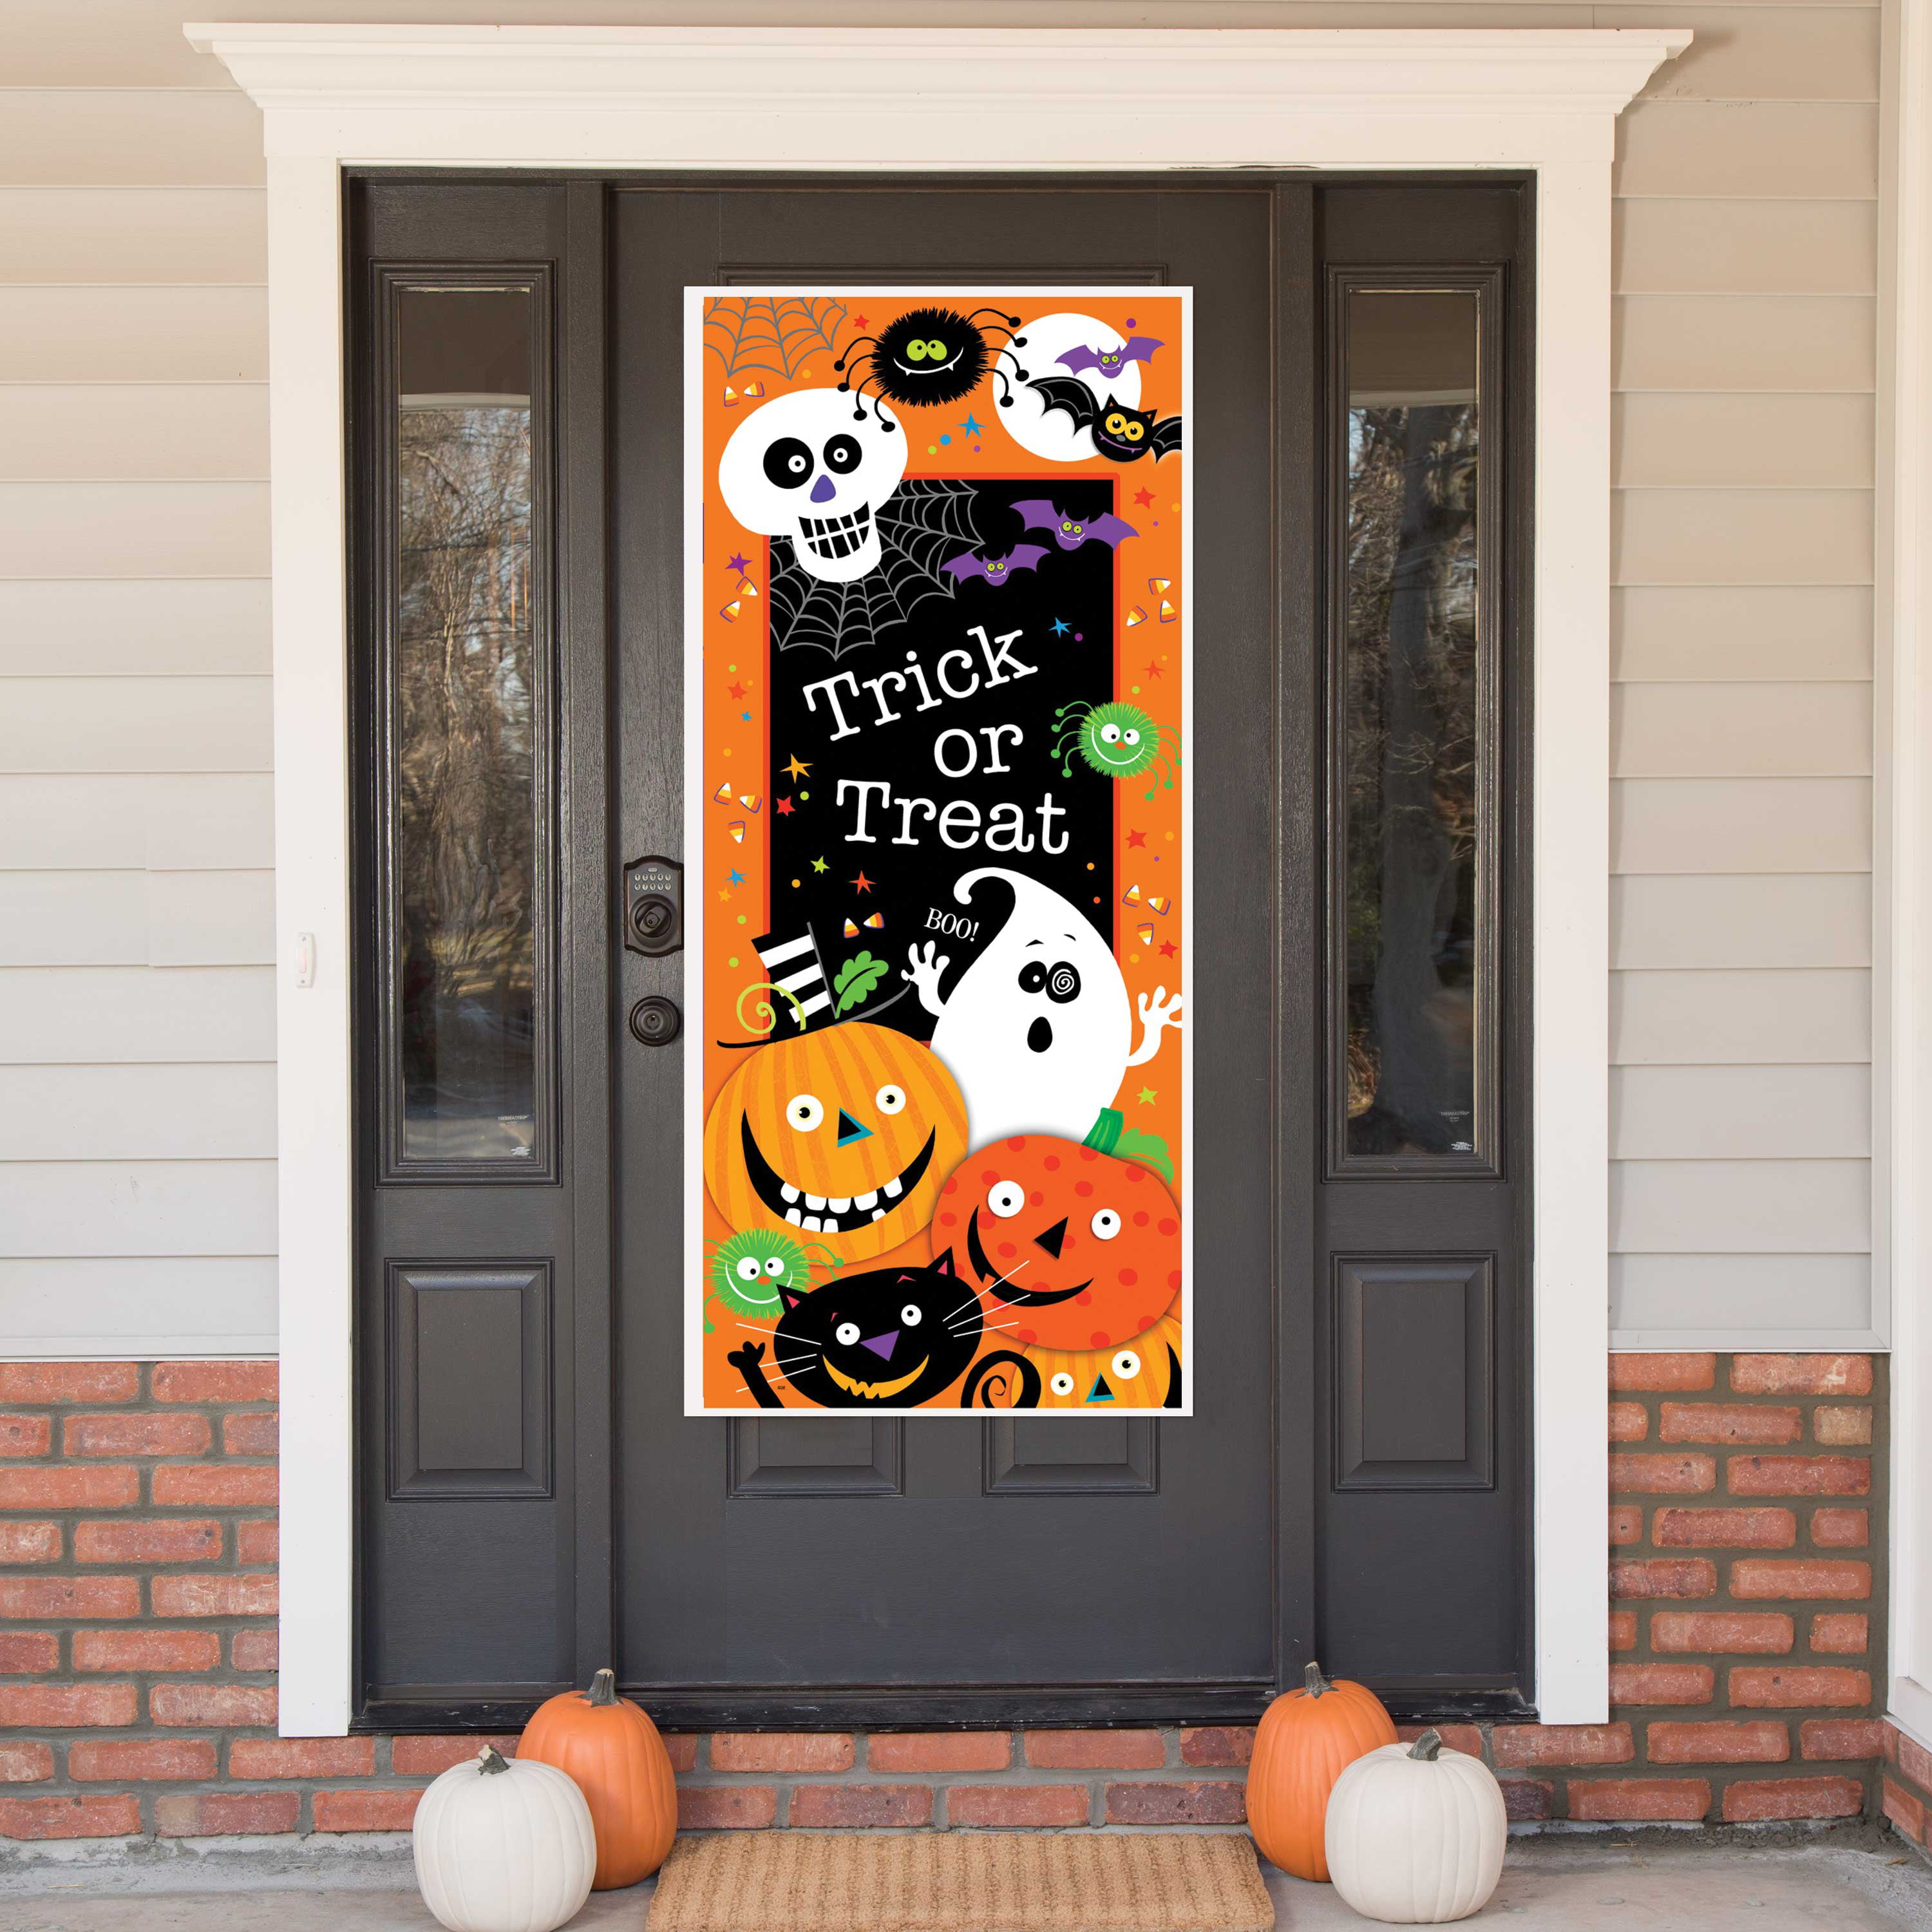 Details about   2 Ghost Halloween Door Covers Decorations 60"x30" Plastic Sheeting 